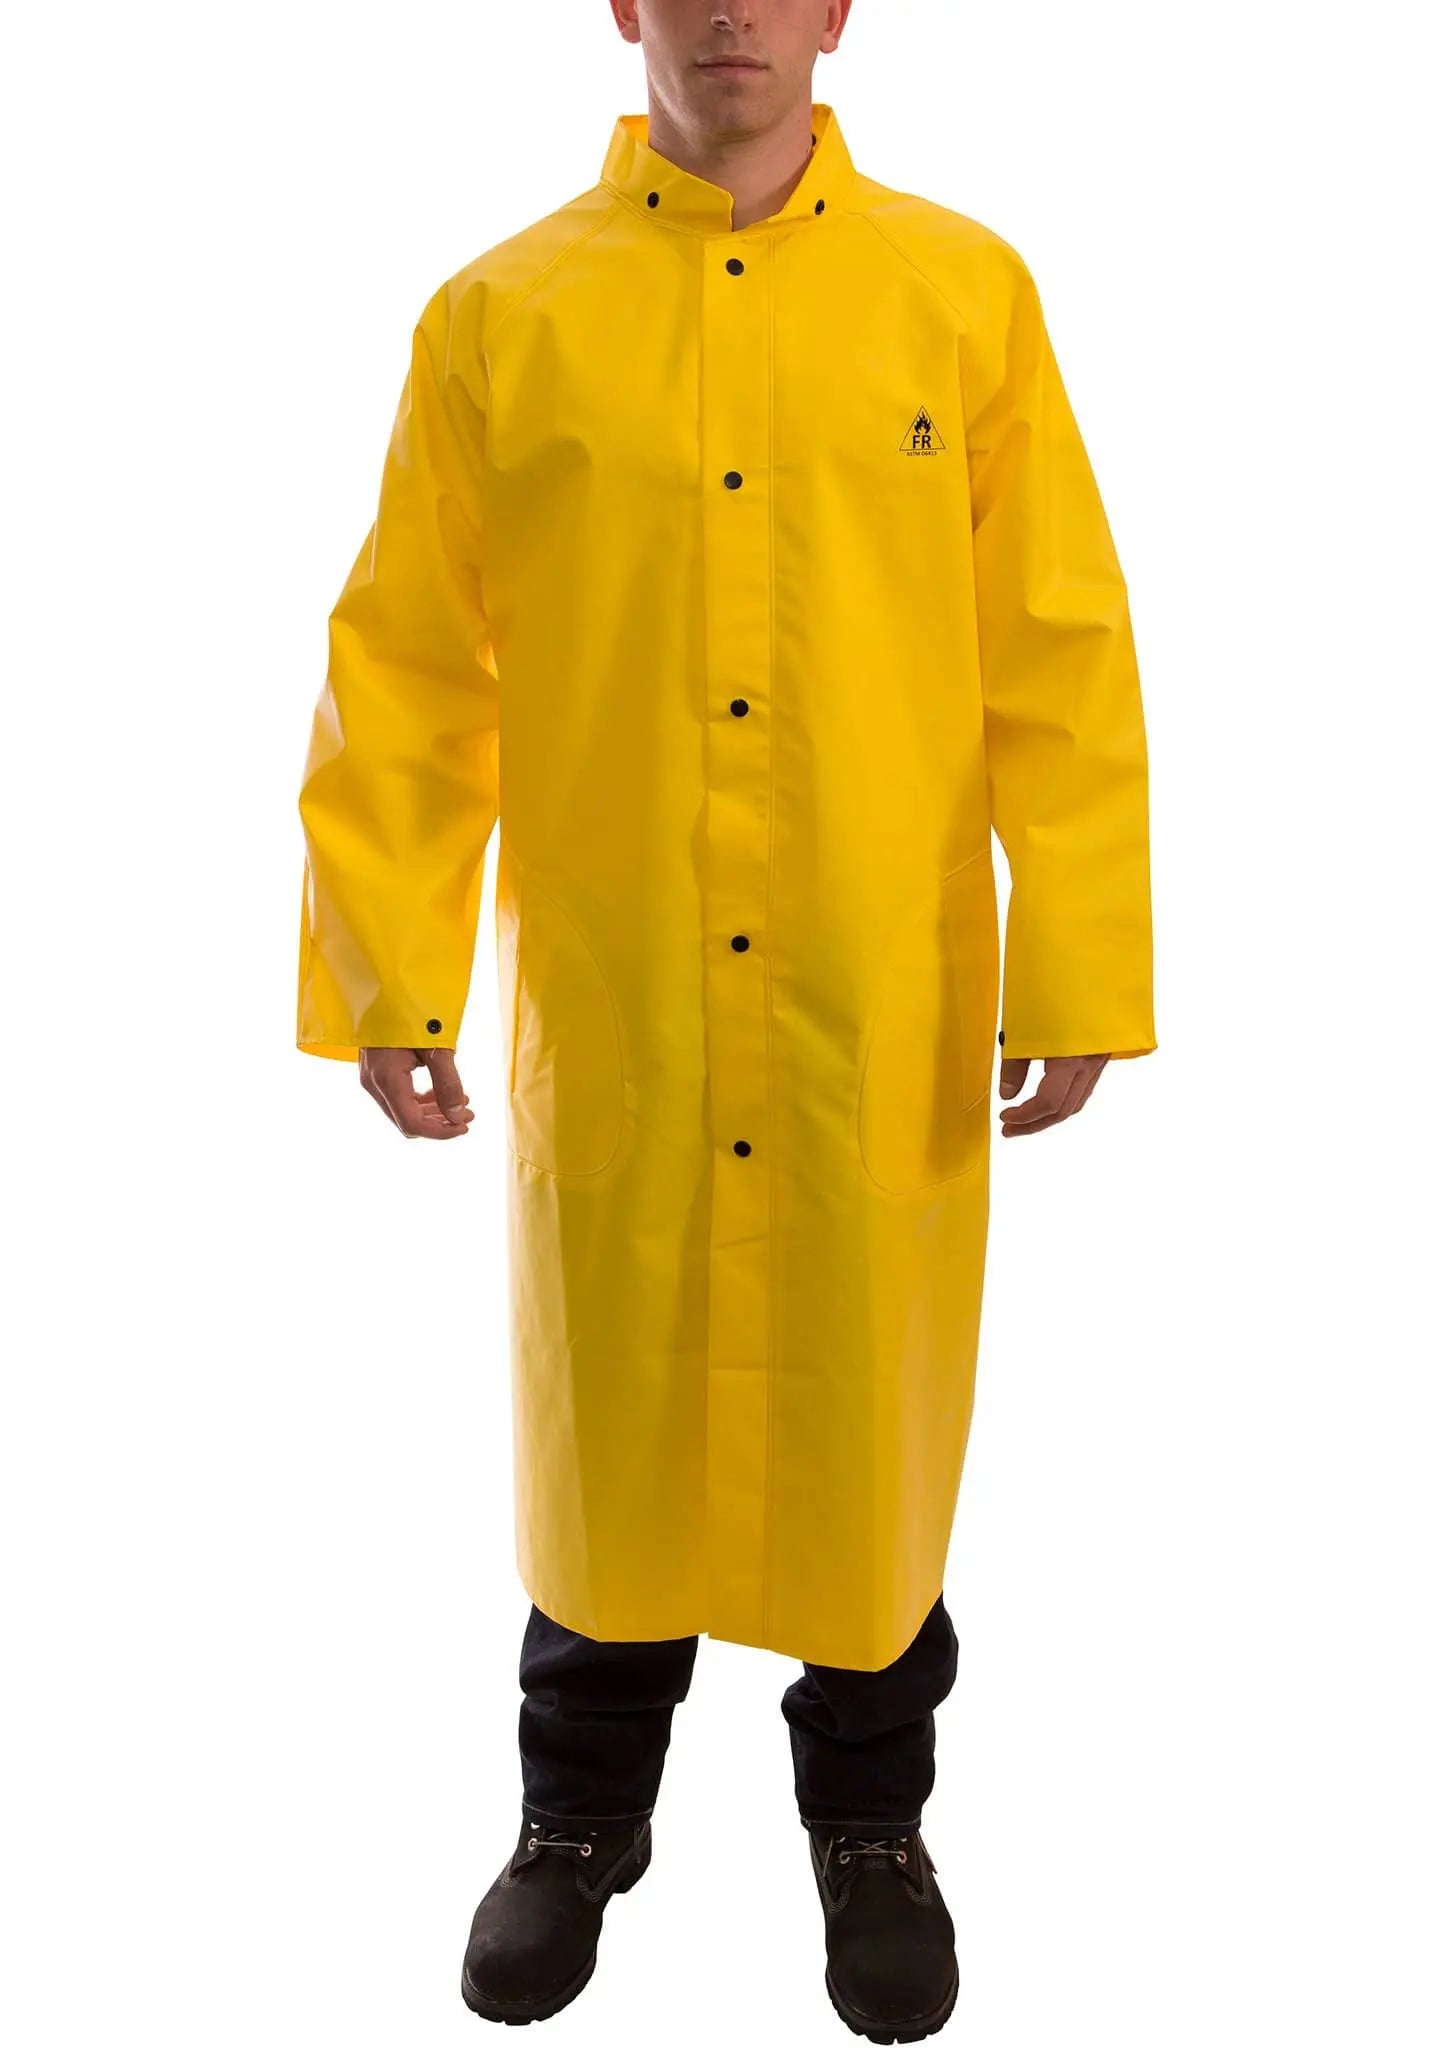 Quality Non-Fire Resistant Workwear